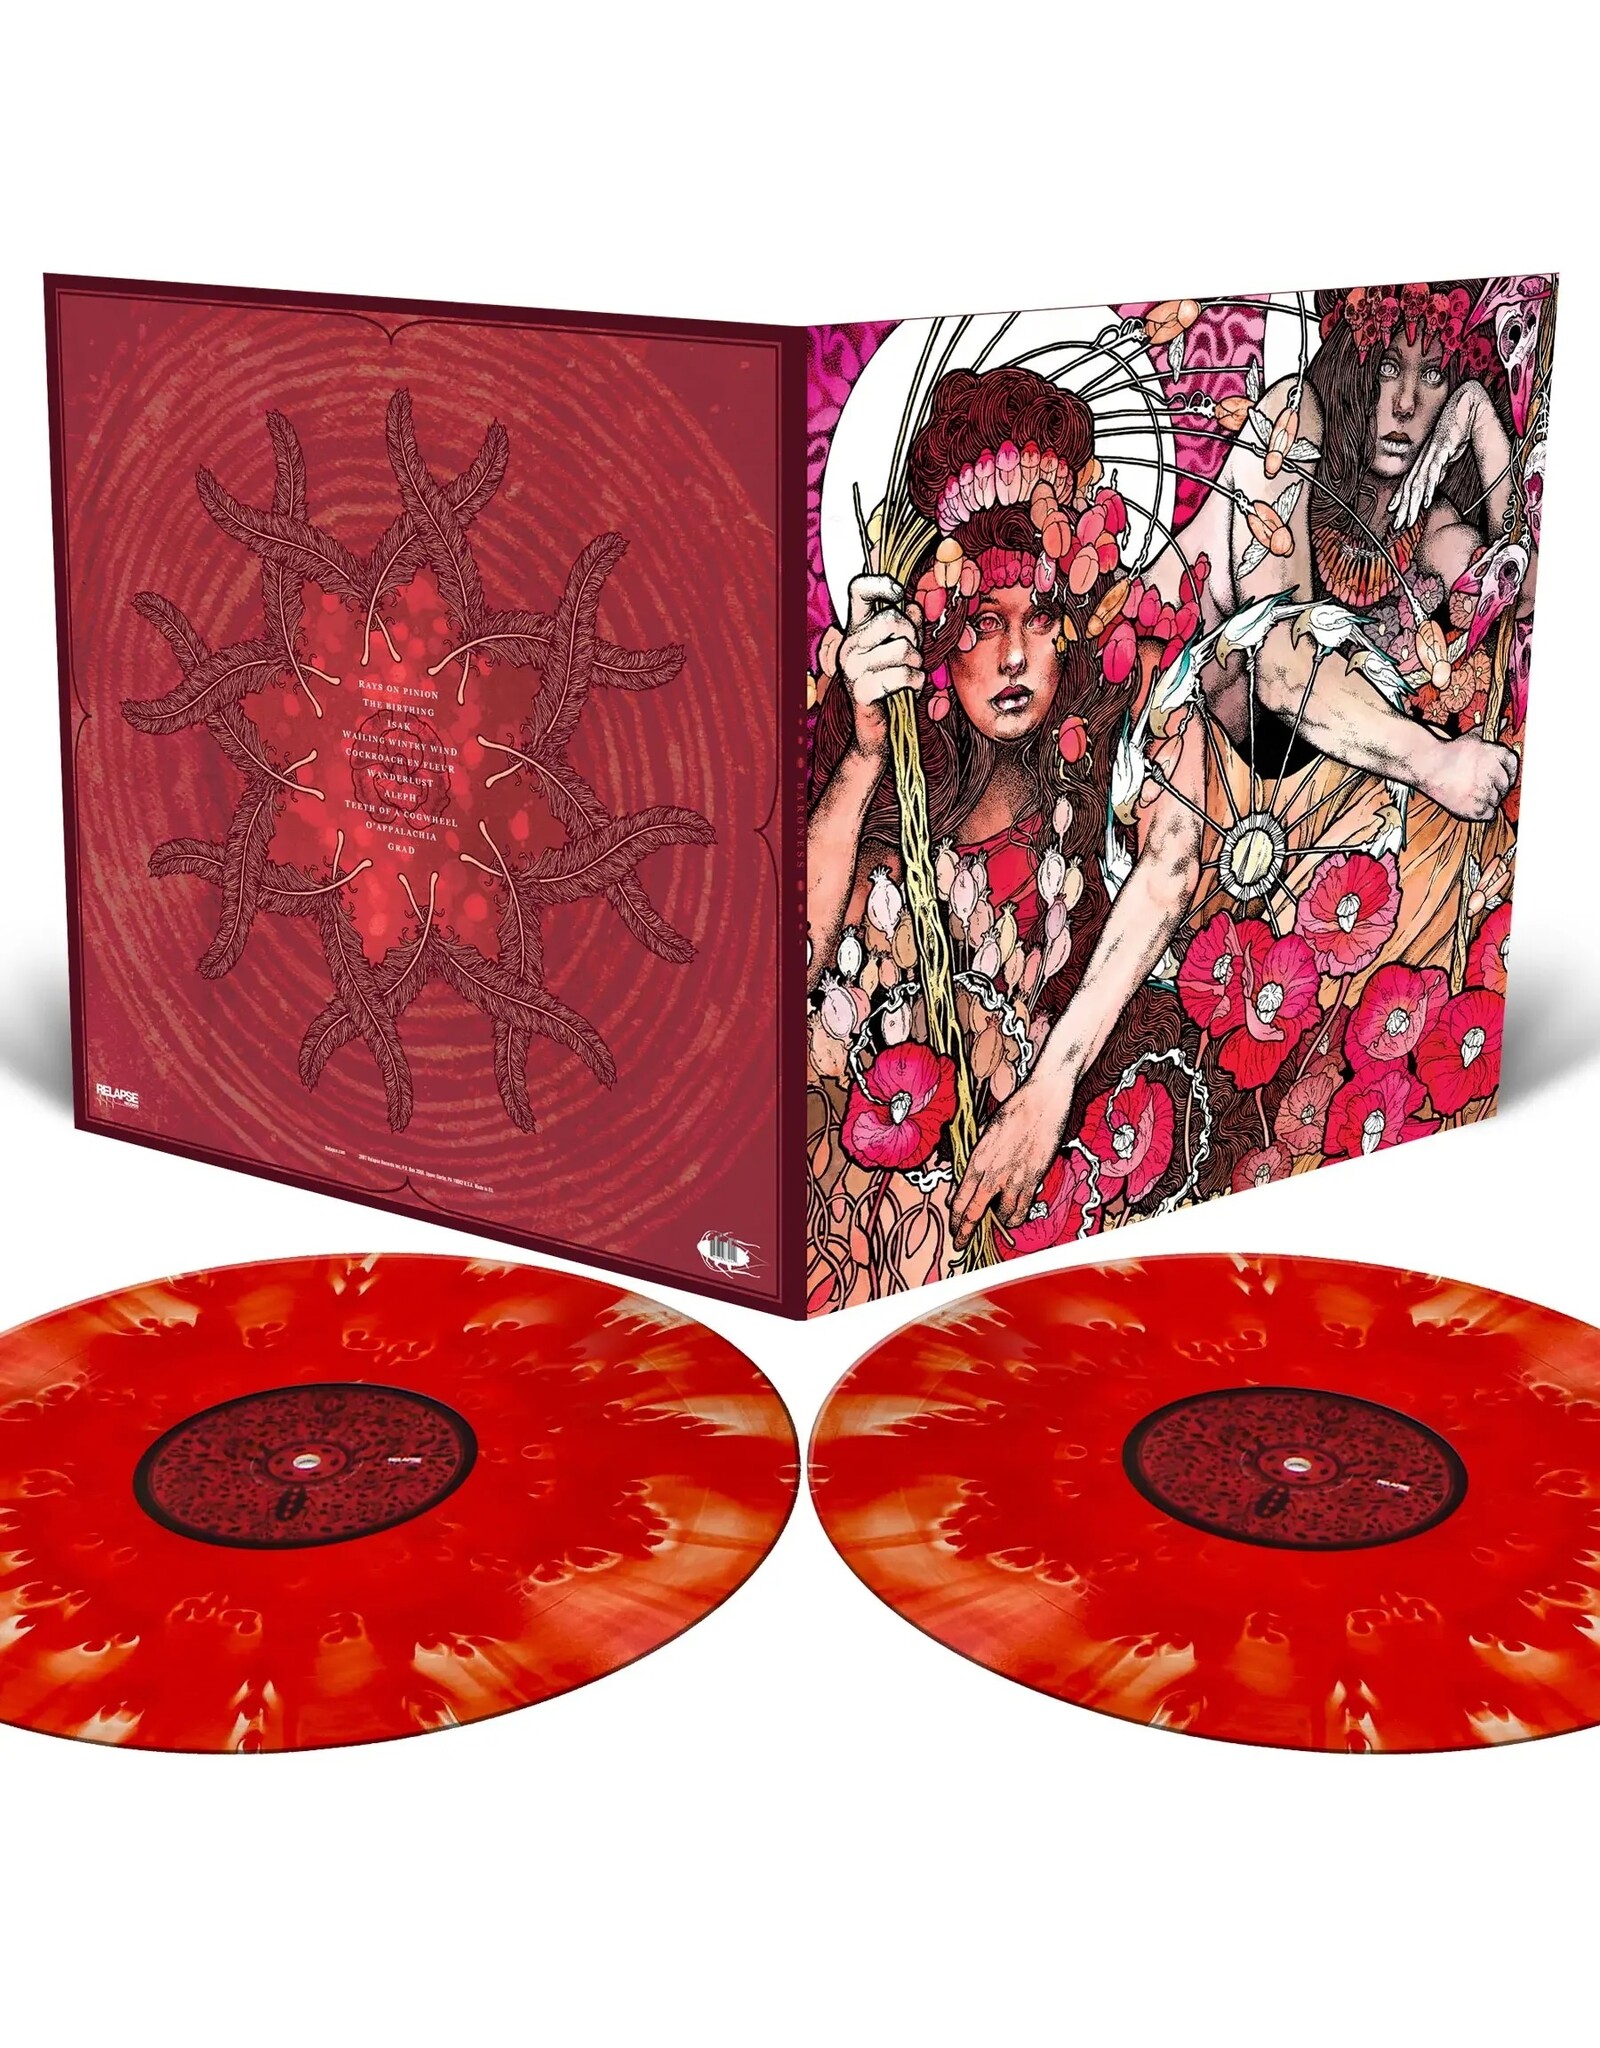 Baroness - Red Album (Red Cloudy Vinyl)